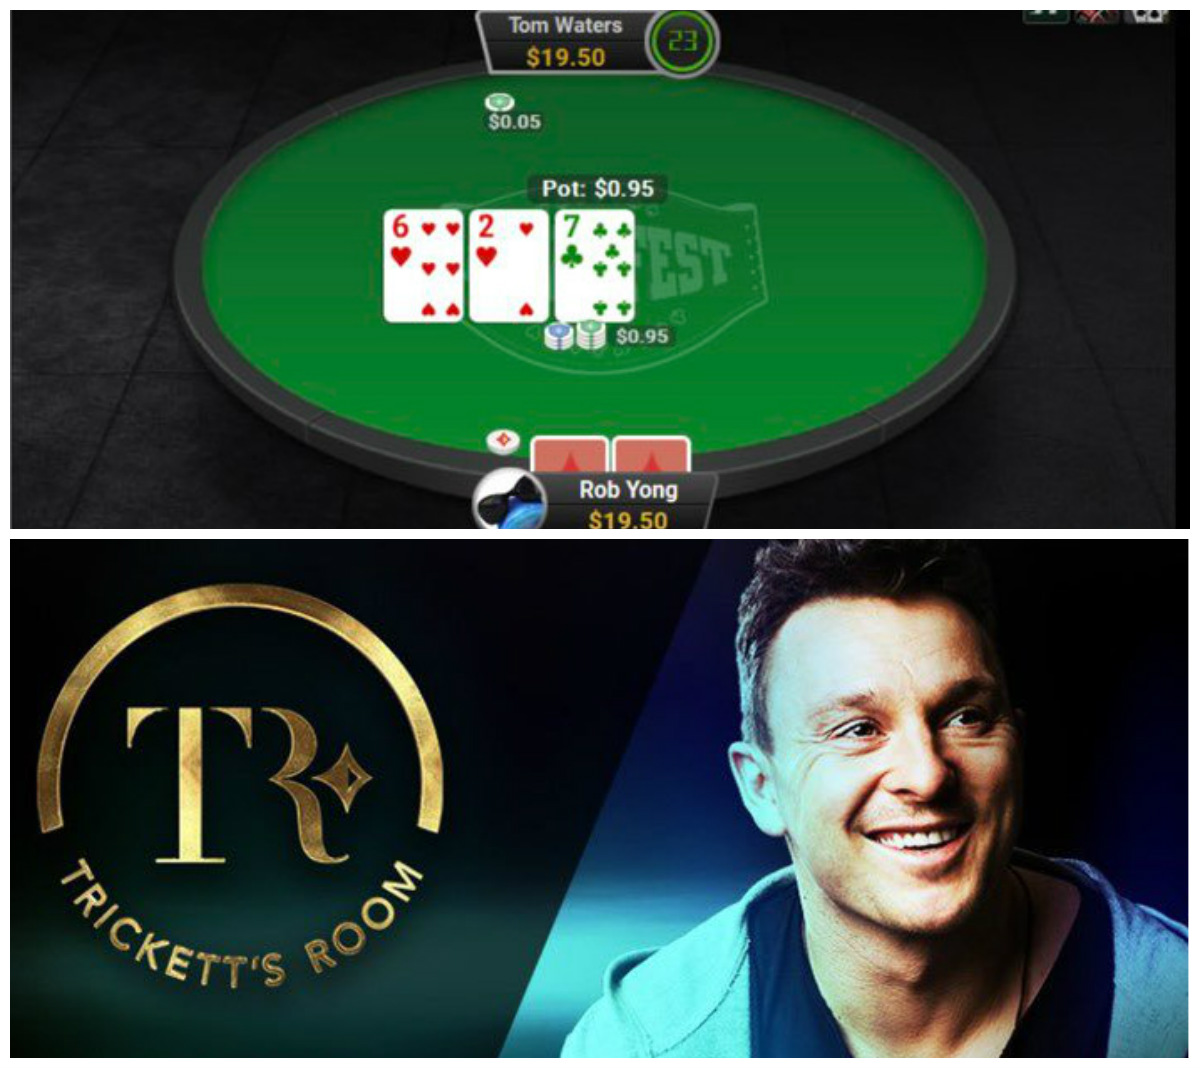 Partypoker to Test Using Real Names for Some High Stakes Cash Games in August